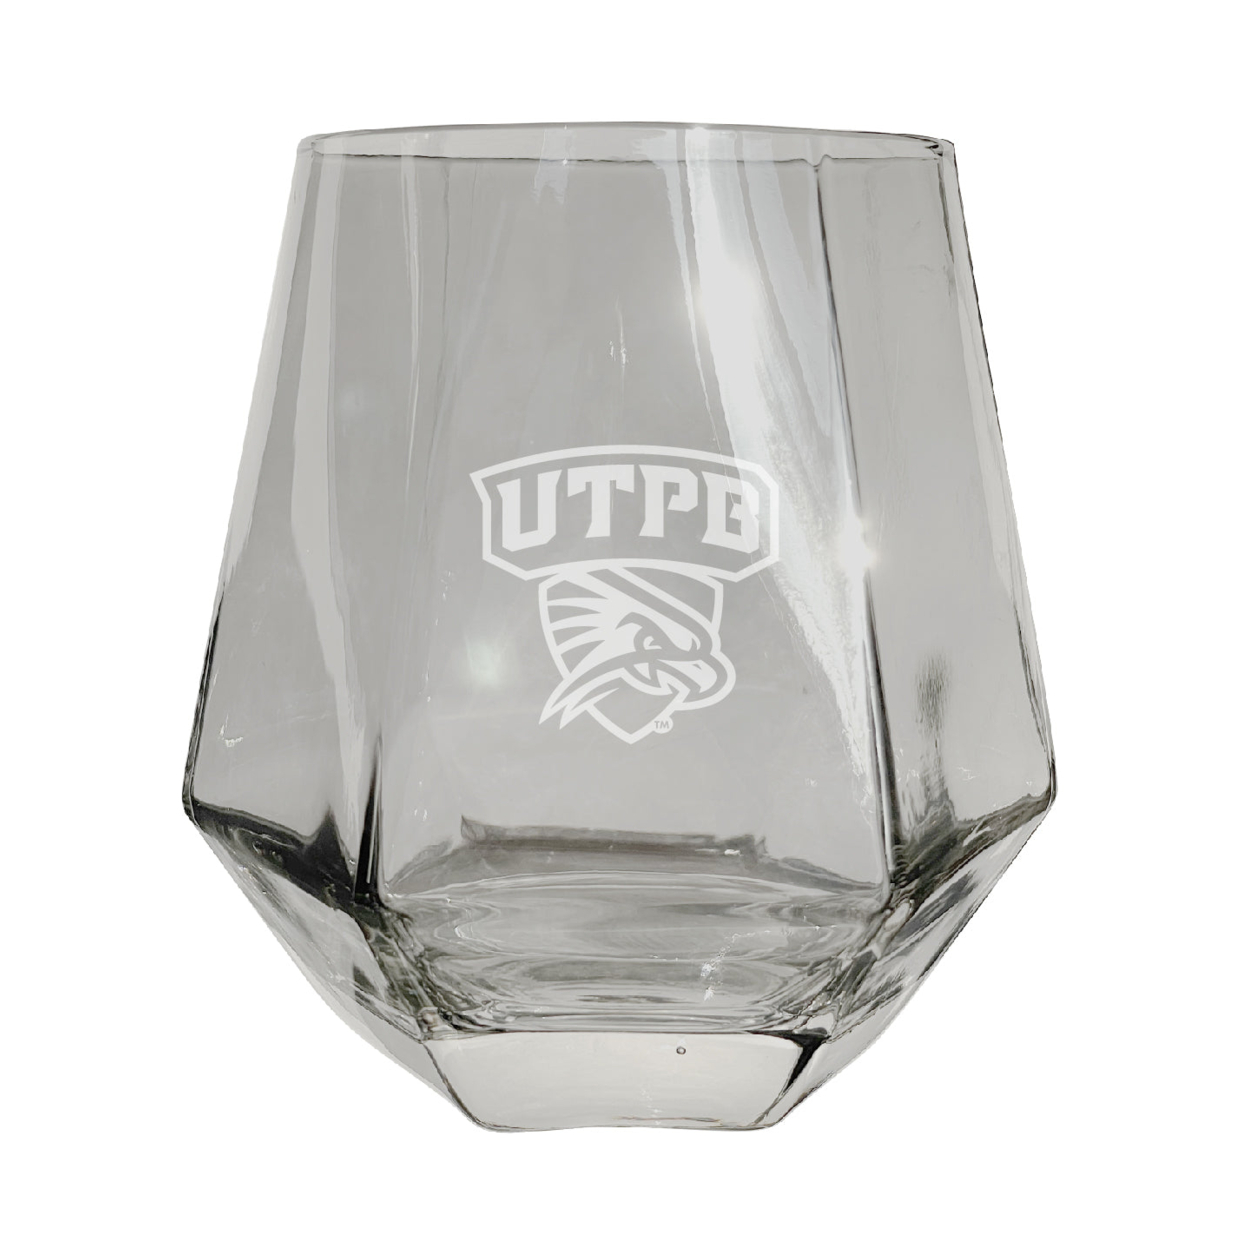 University Of Texas Of The Permian Basin Etched Diamond Cut Stemless 10 Ounce Wine Glass Clear